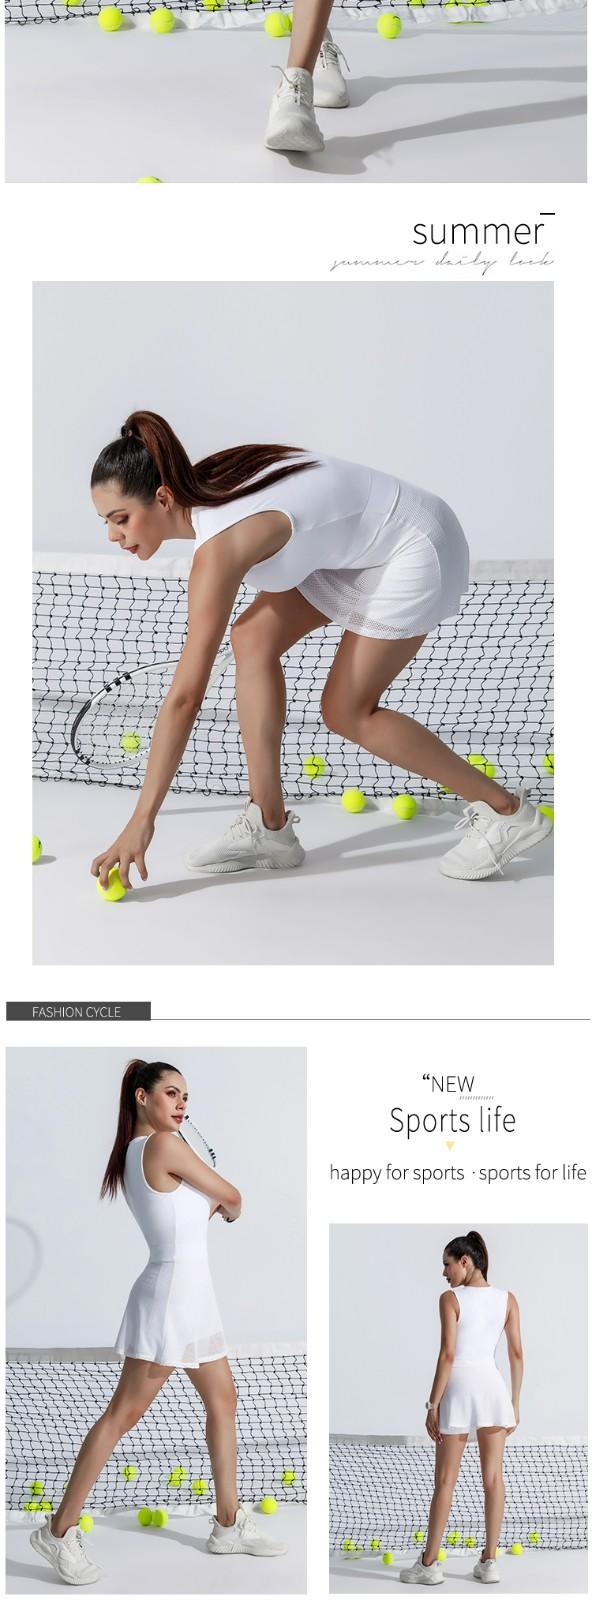 INGOR custom women's tennis outfits at the gym